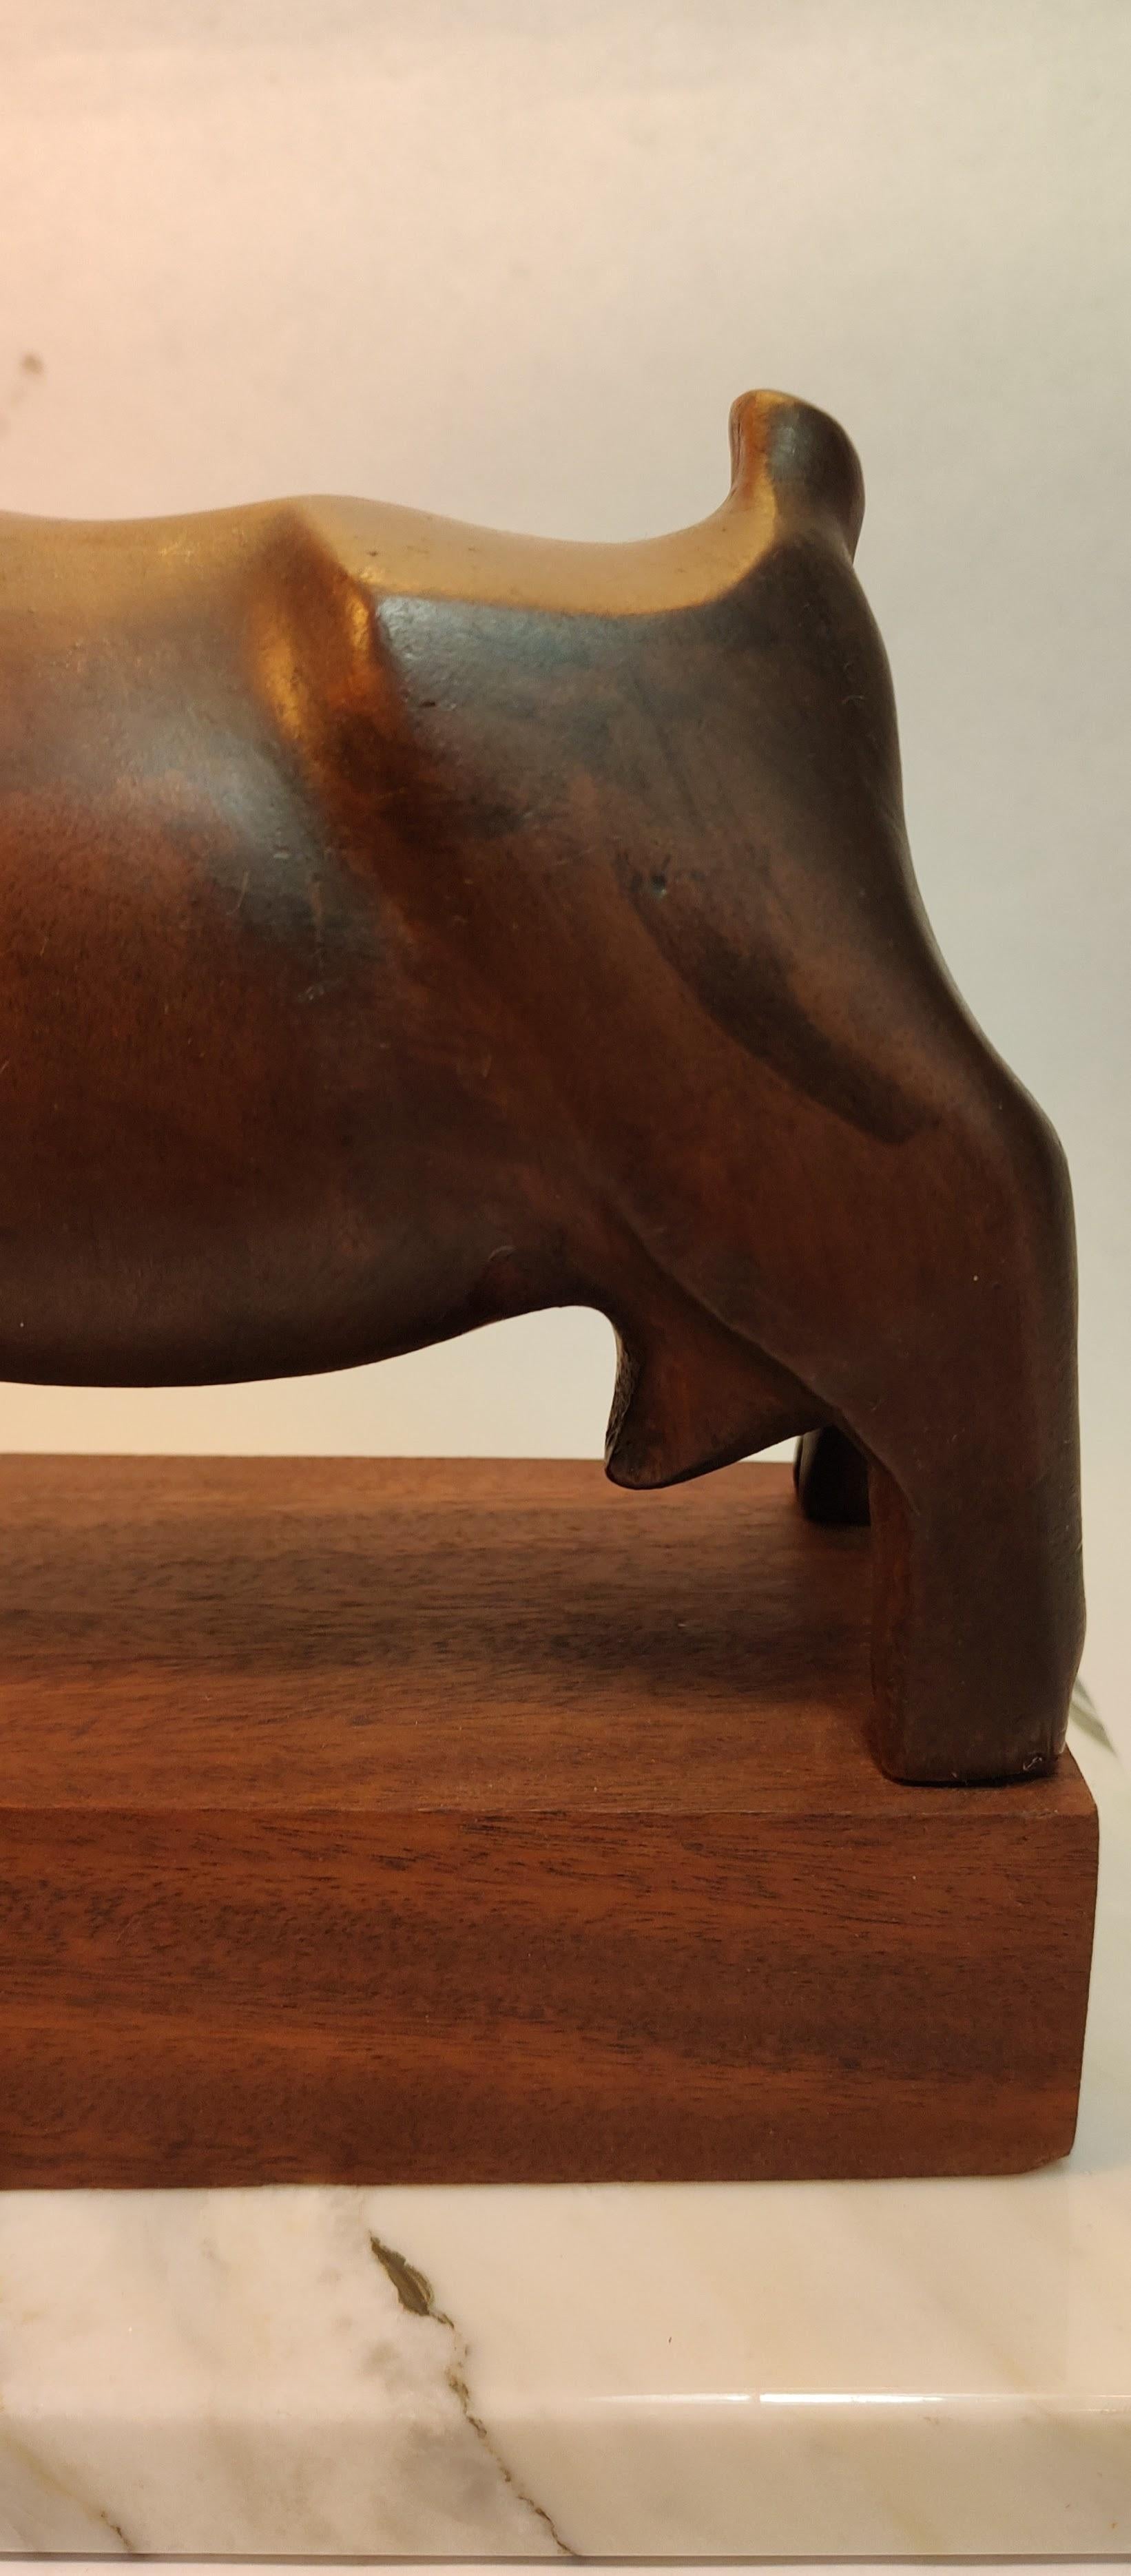 Mahogany Beautiful Sculpture of Goat carved in wood by Israeli Artist For Sale